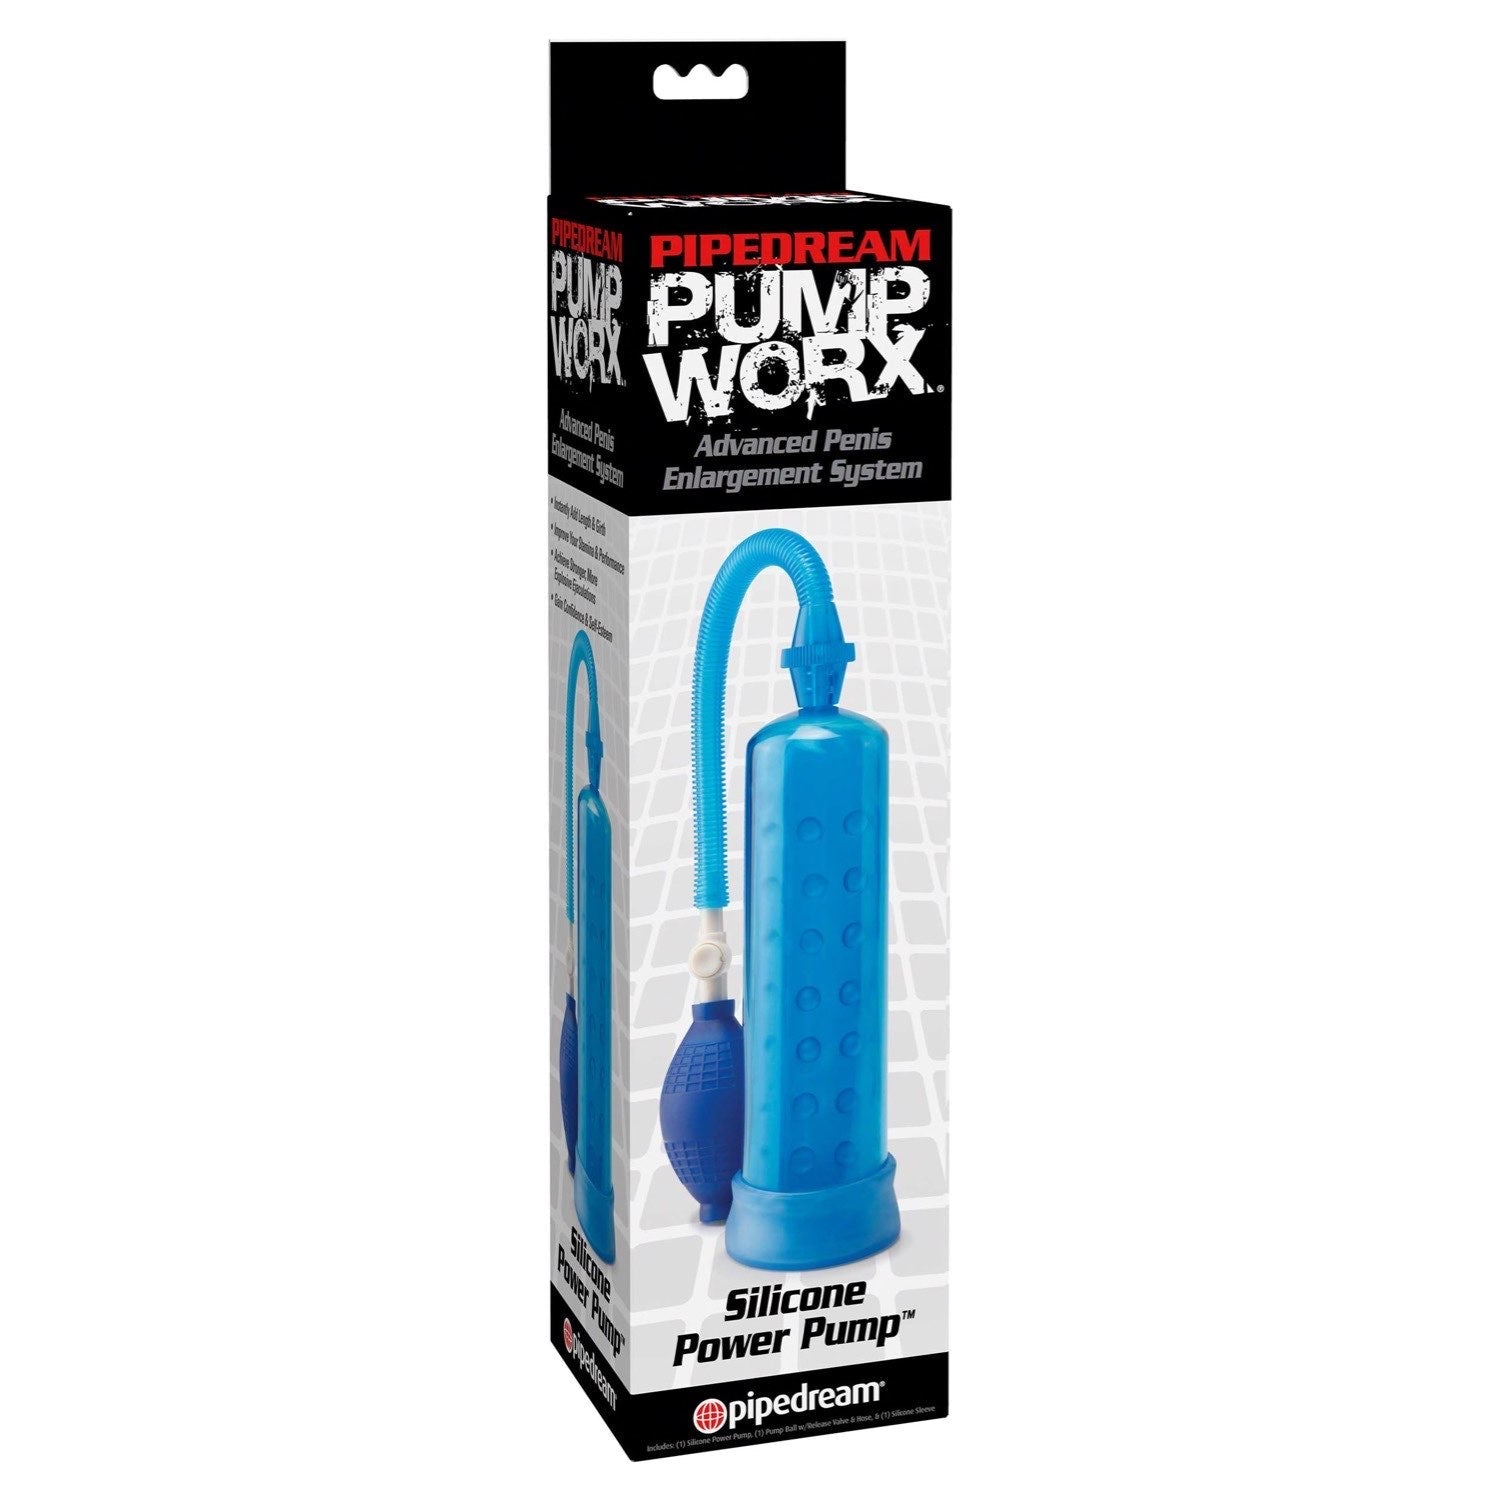 Pump Worx Silicone Power Pump - Blue Penis Pump by Pipedream